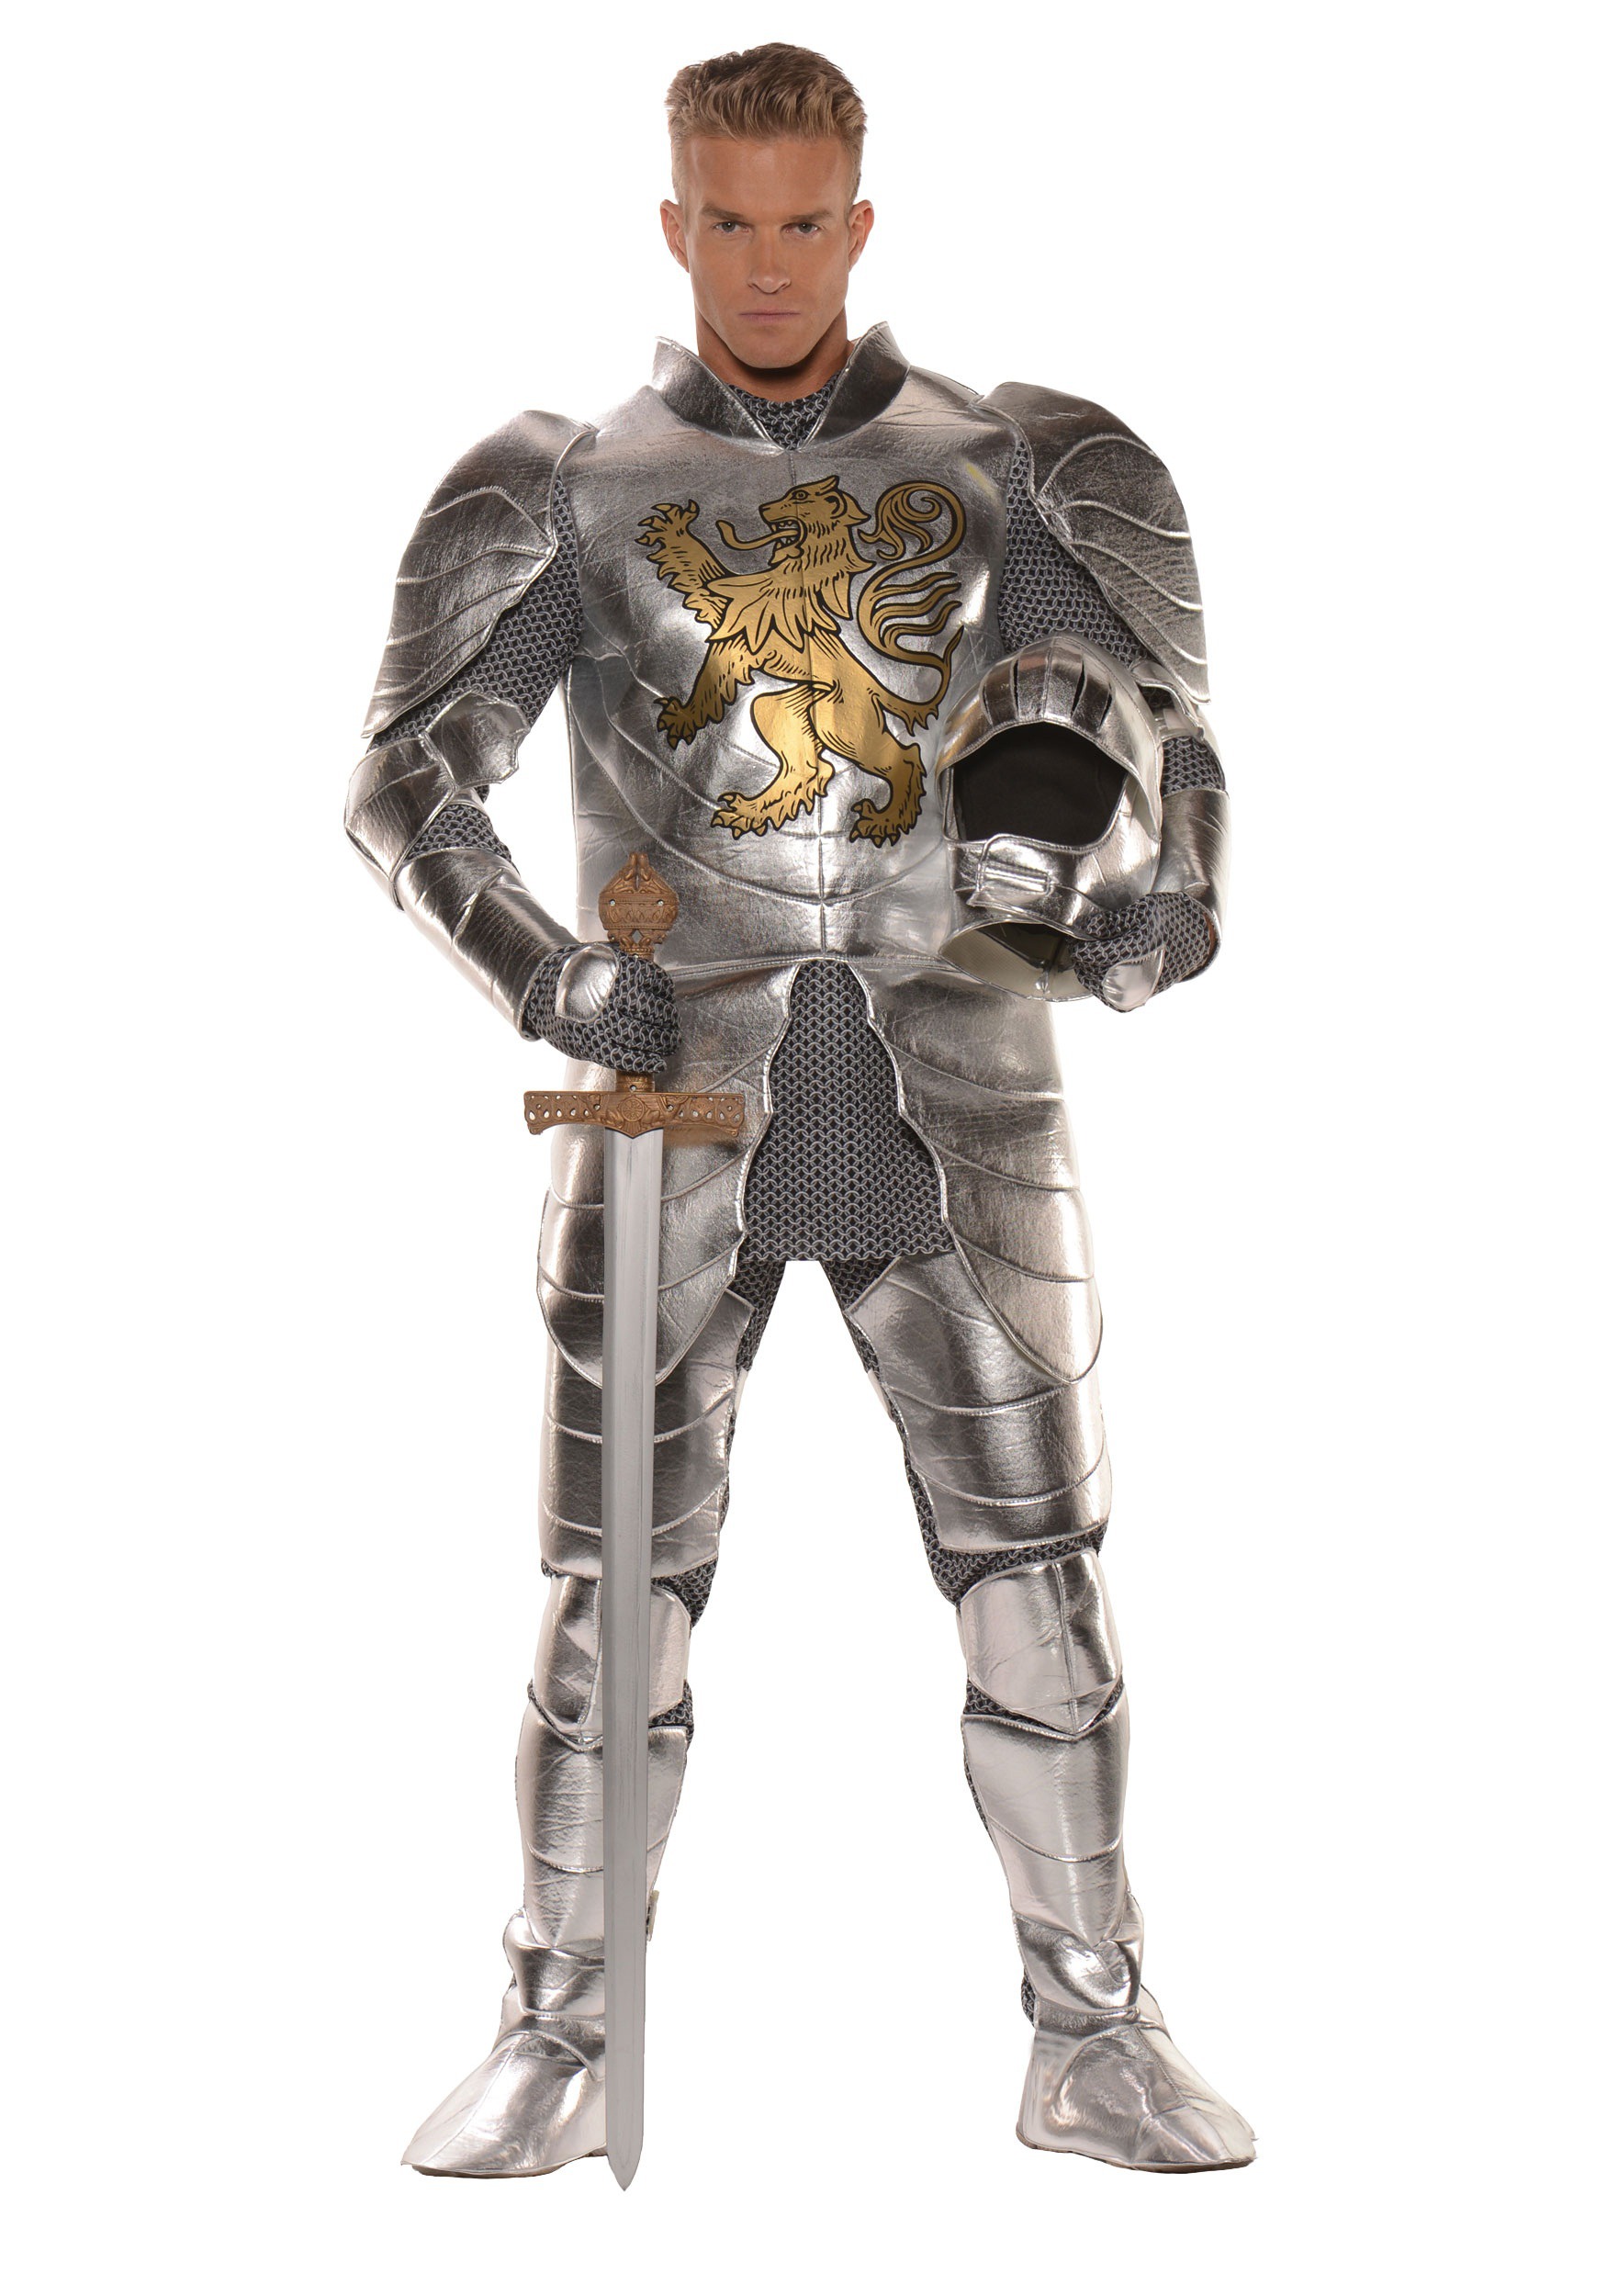 Plus Size Knight in Shining Armor Costume for Men